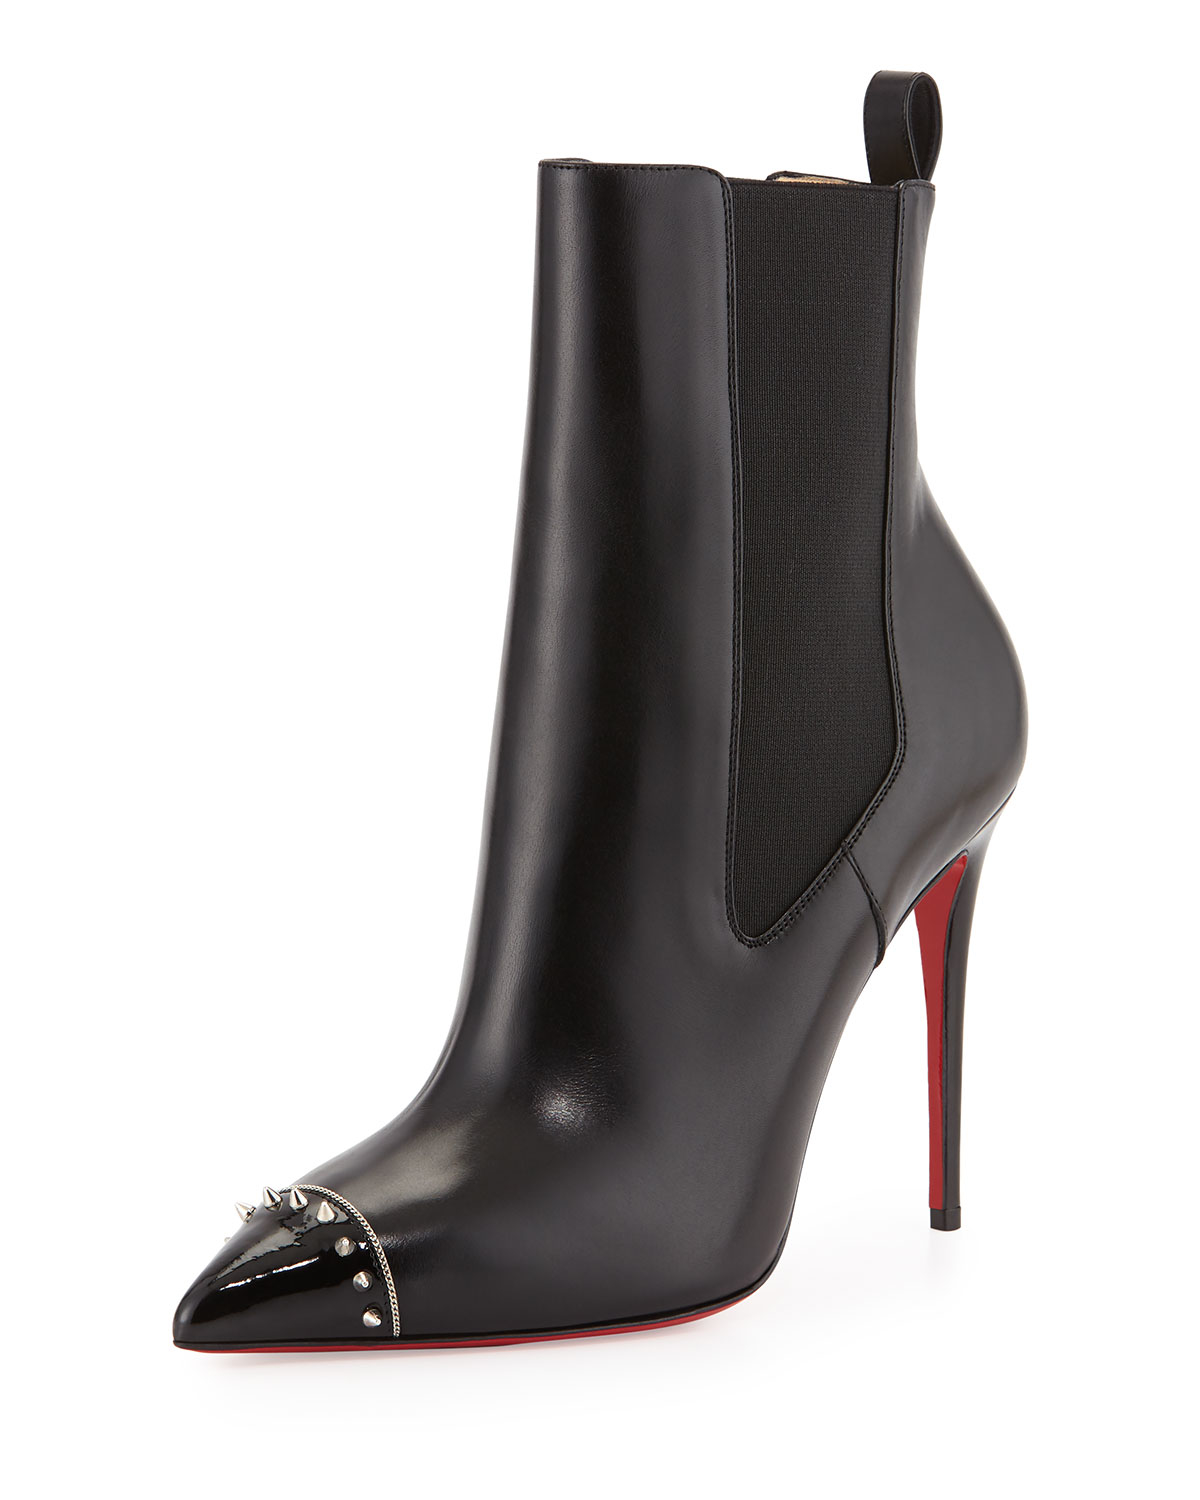 Christian Louboutin Banjo Spiked Leather Boots in Black - Lyst